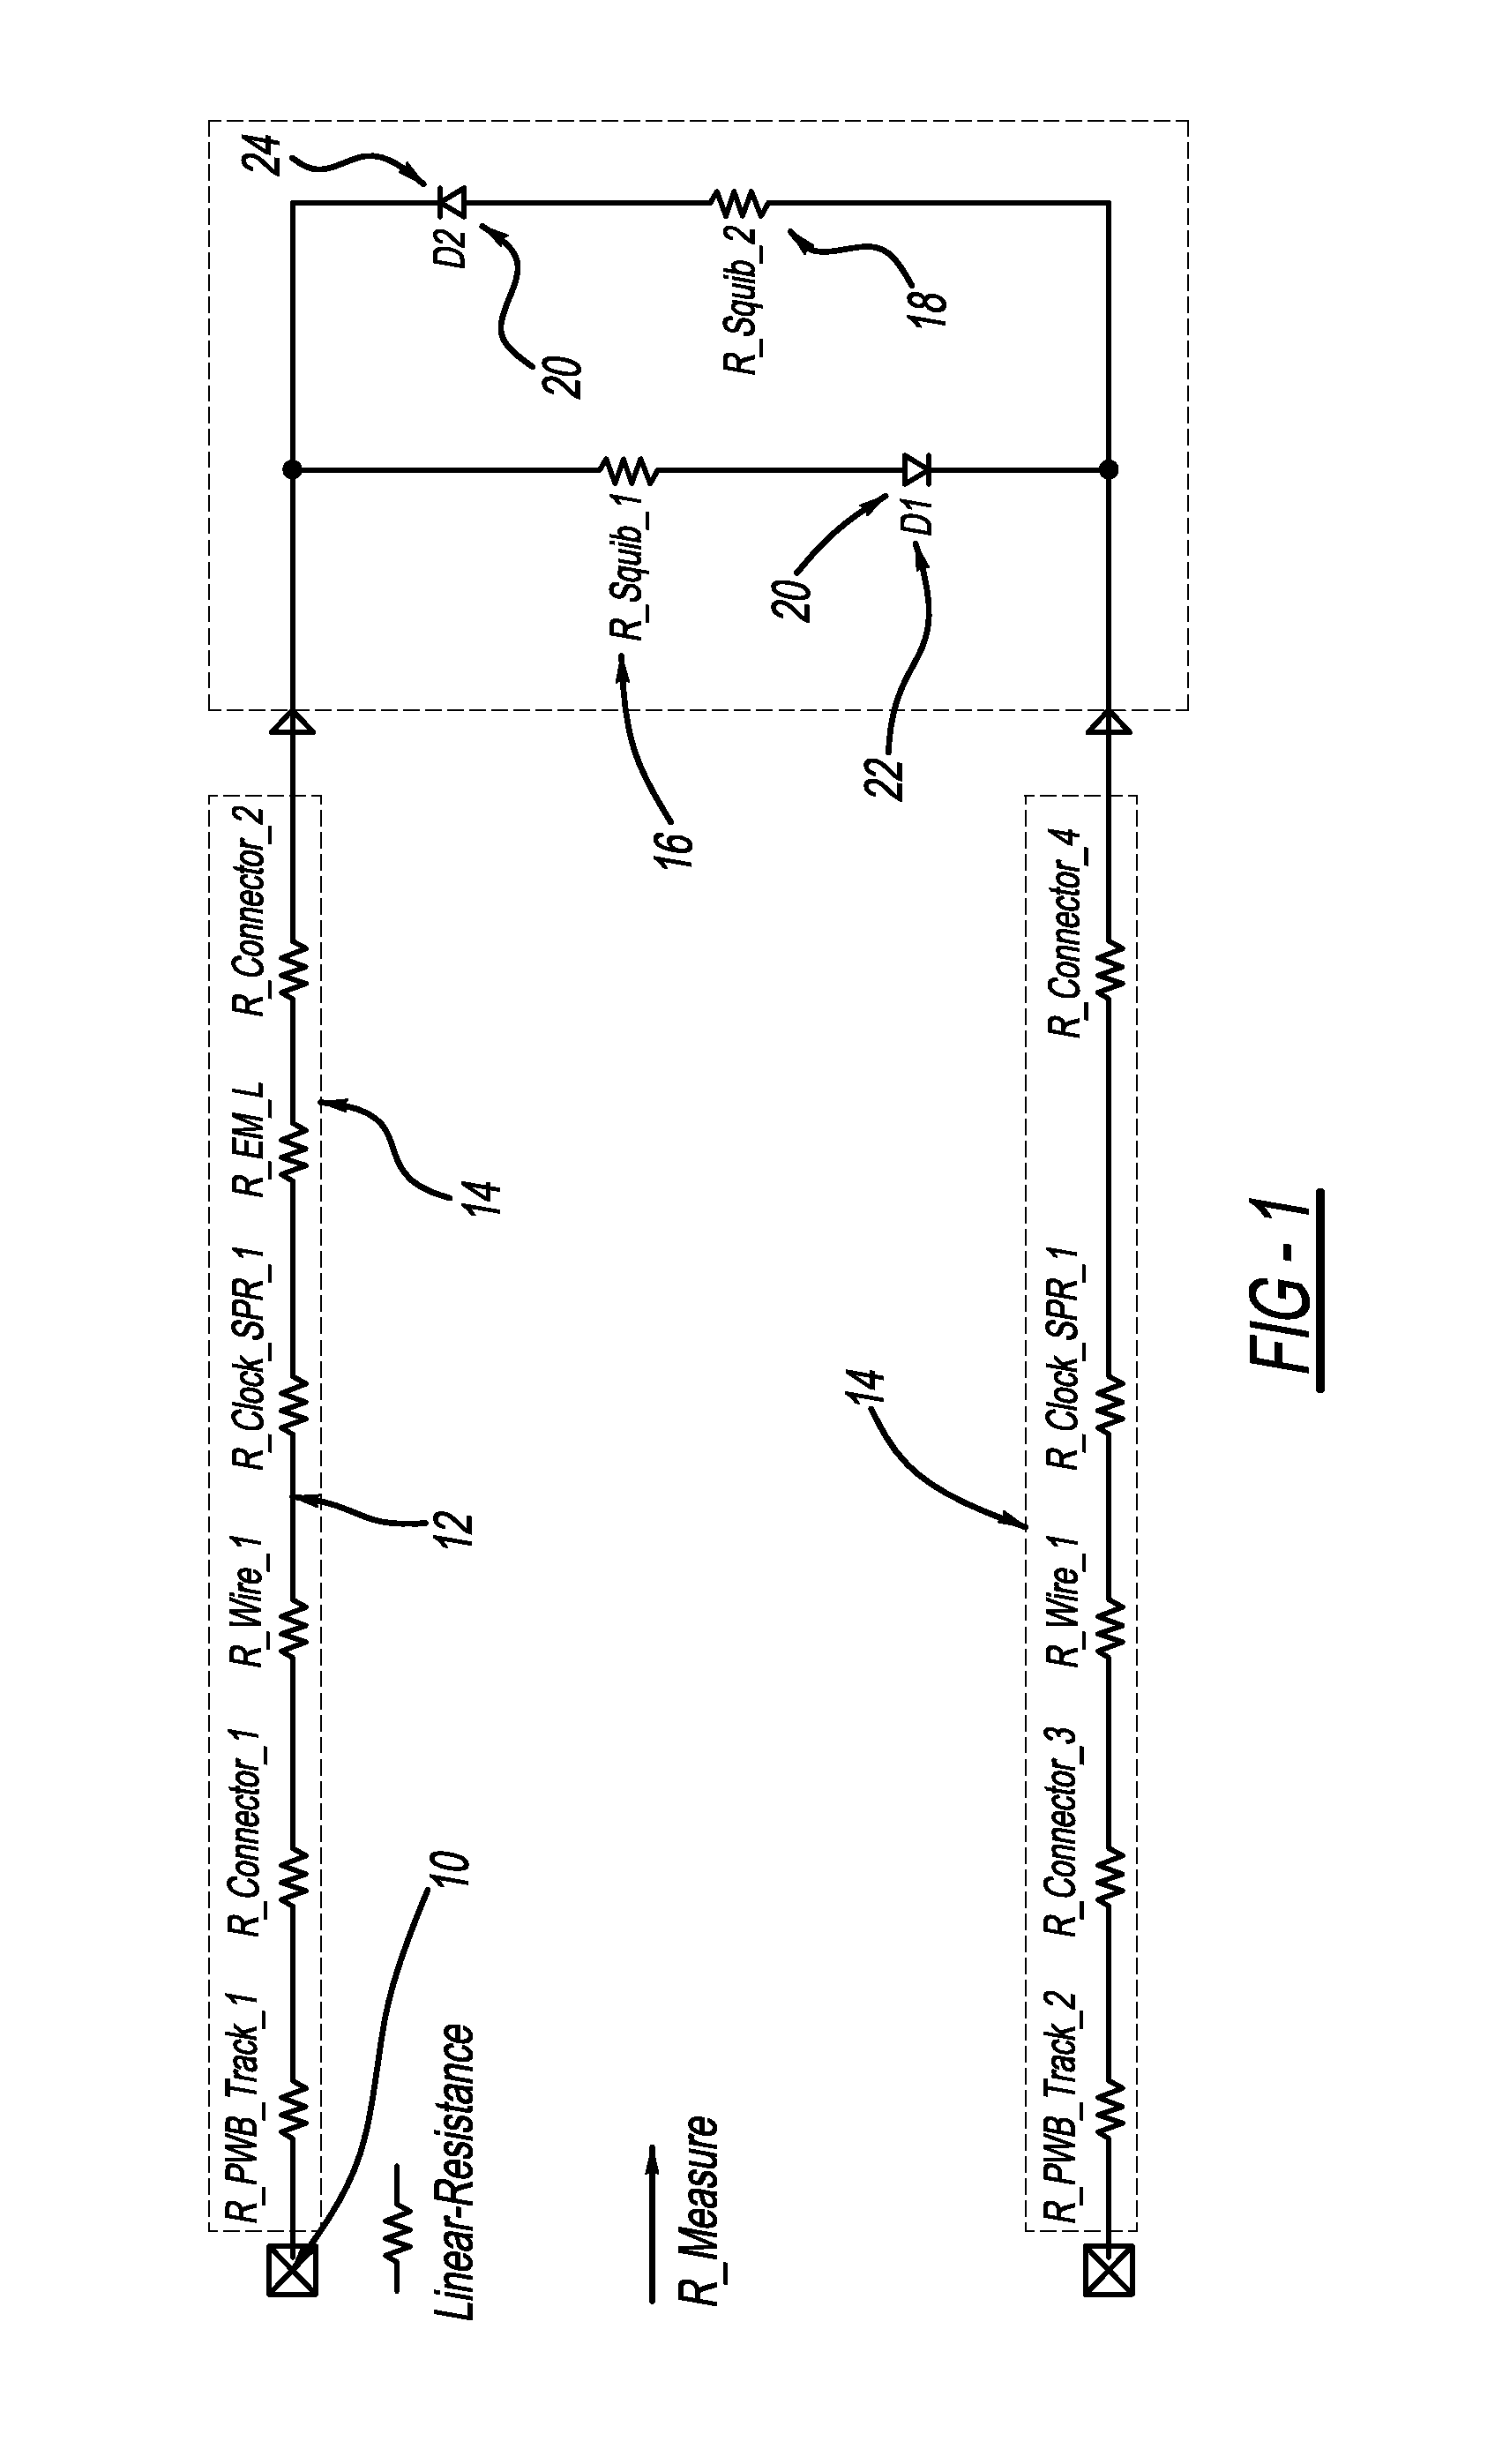 Method and System for Dianostic Measurement of Motor Vehicle Restraint System Squib Loop Resistance